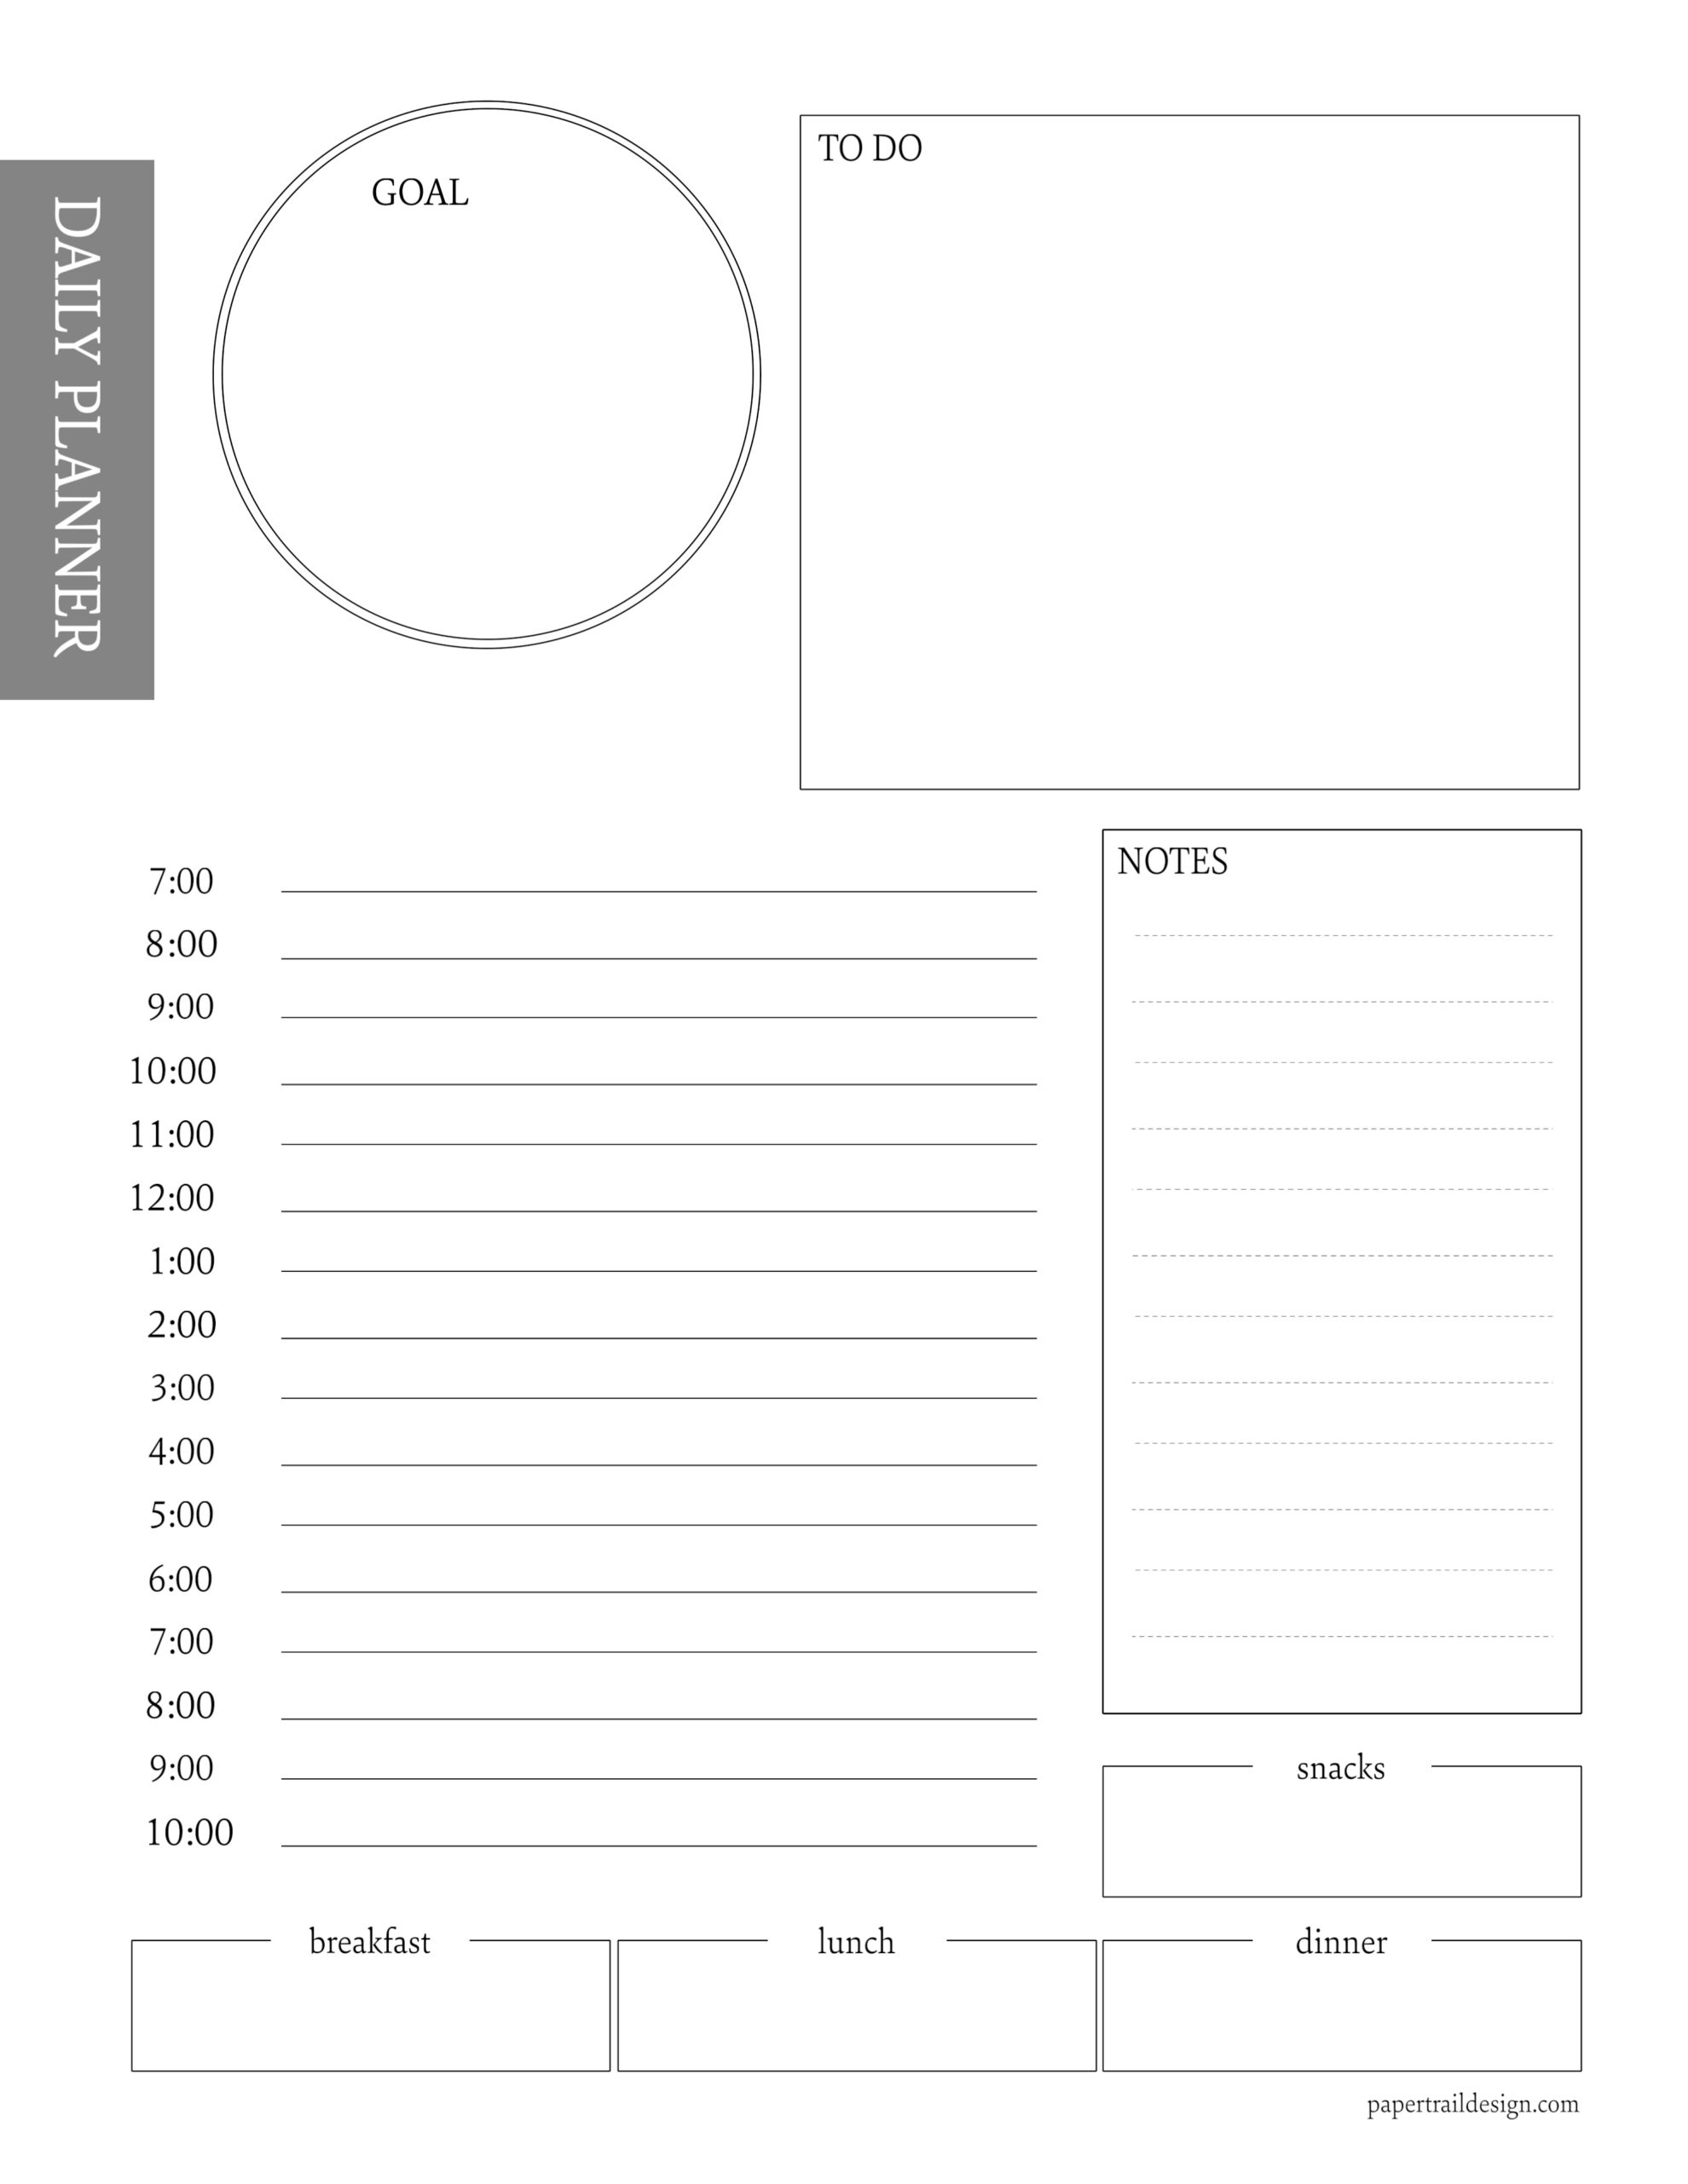 Free Daily Planner Printable Template | Paper Trail Design Page A Day Calendar Template